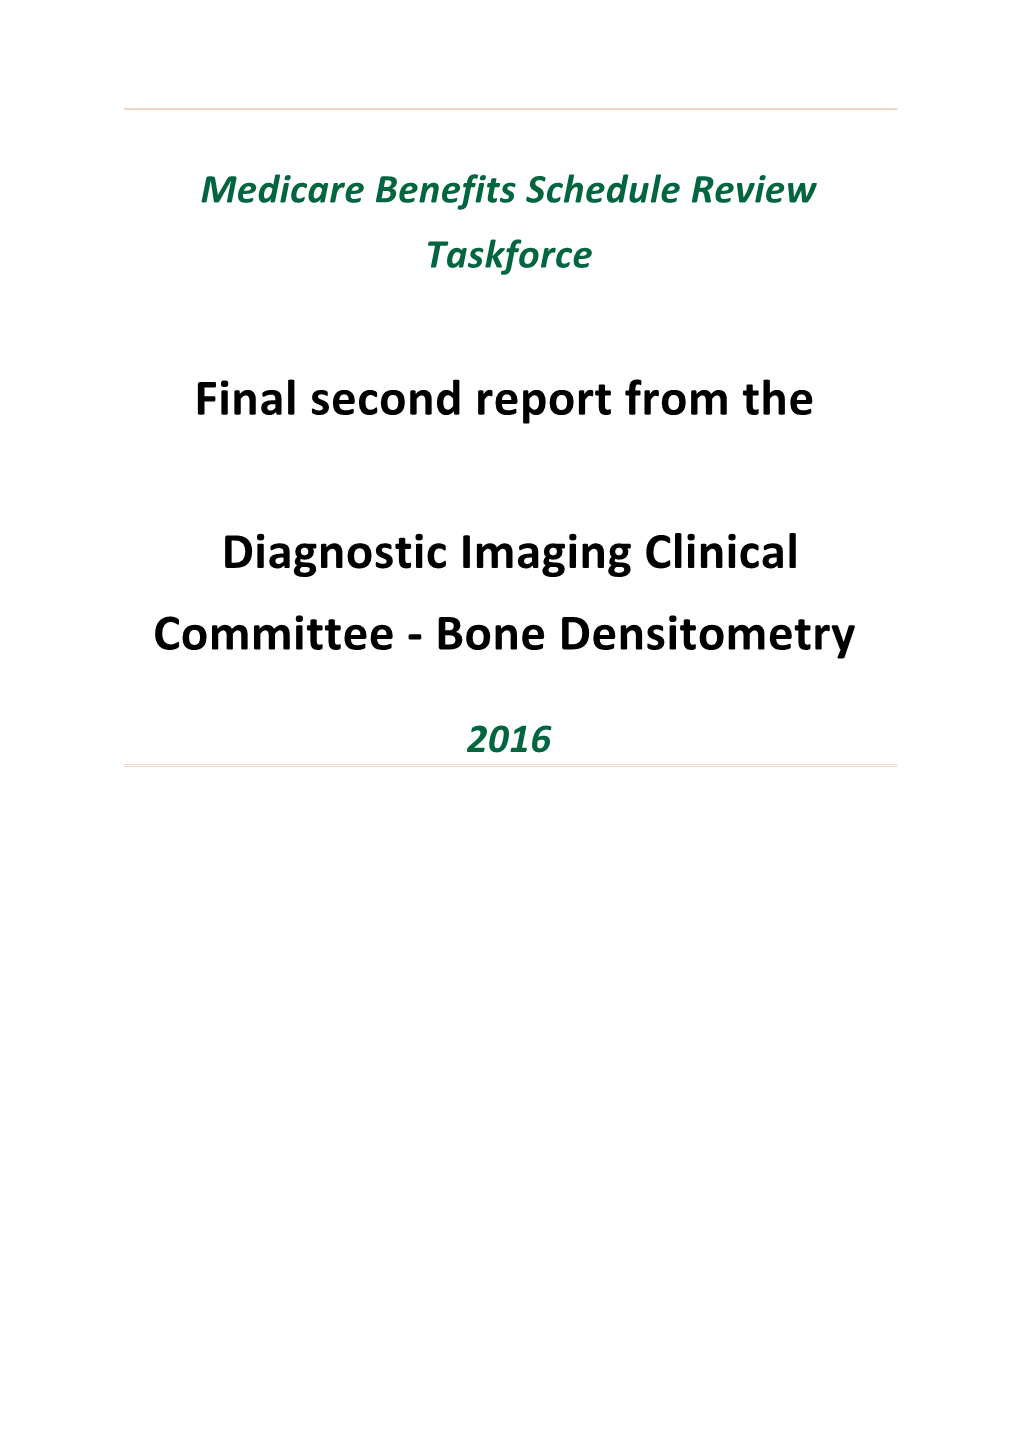 Report from the Diagnostic Imaging Clinical Committee on the Review of Bone Densitometry